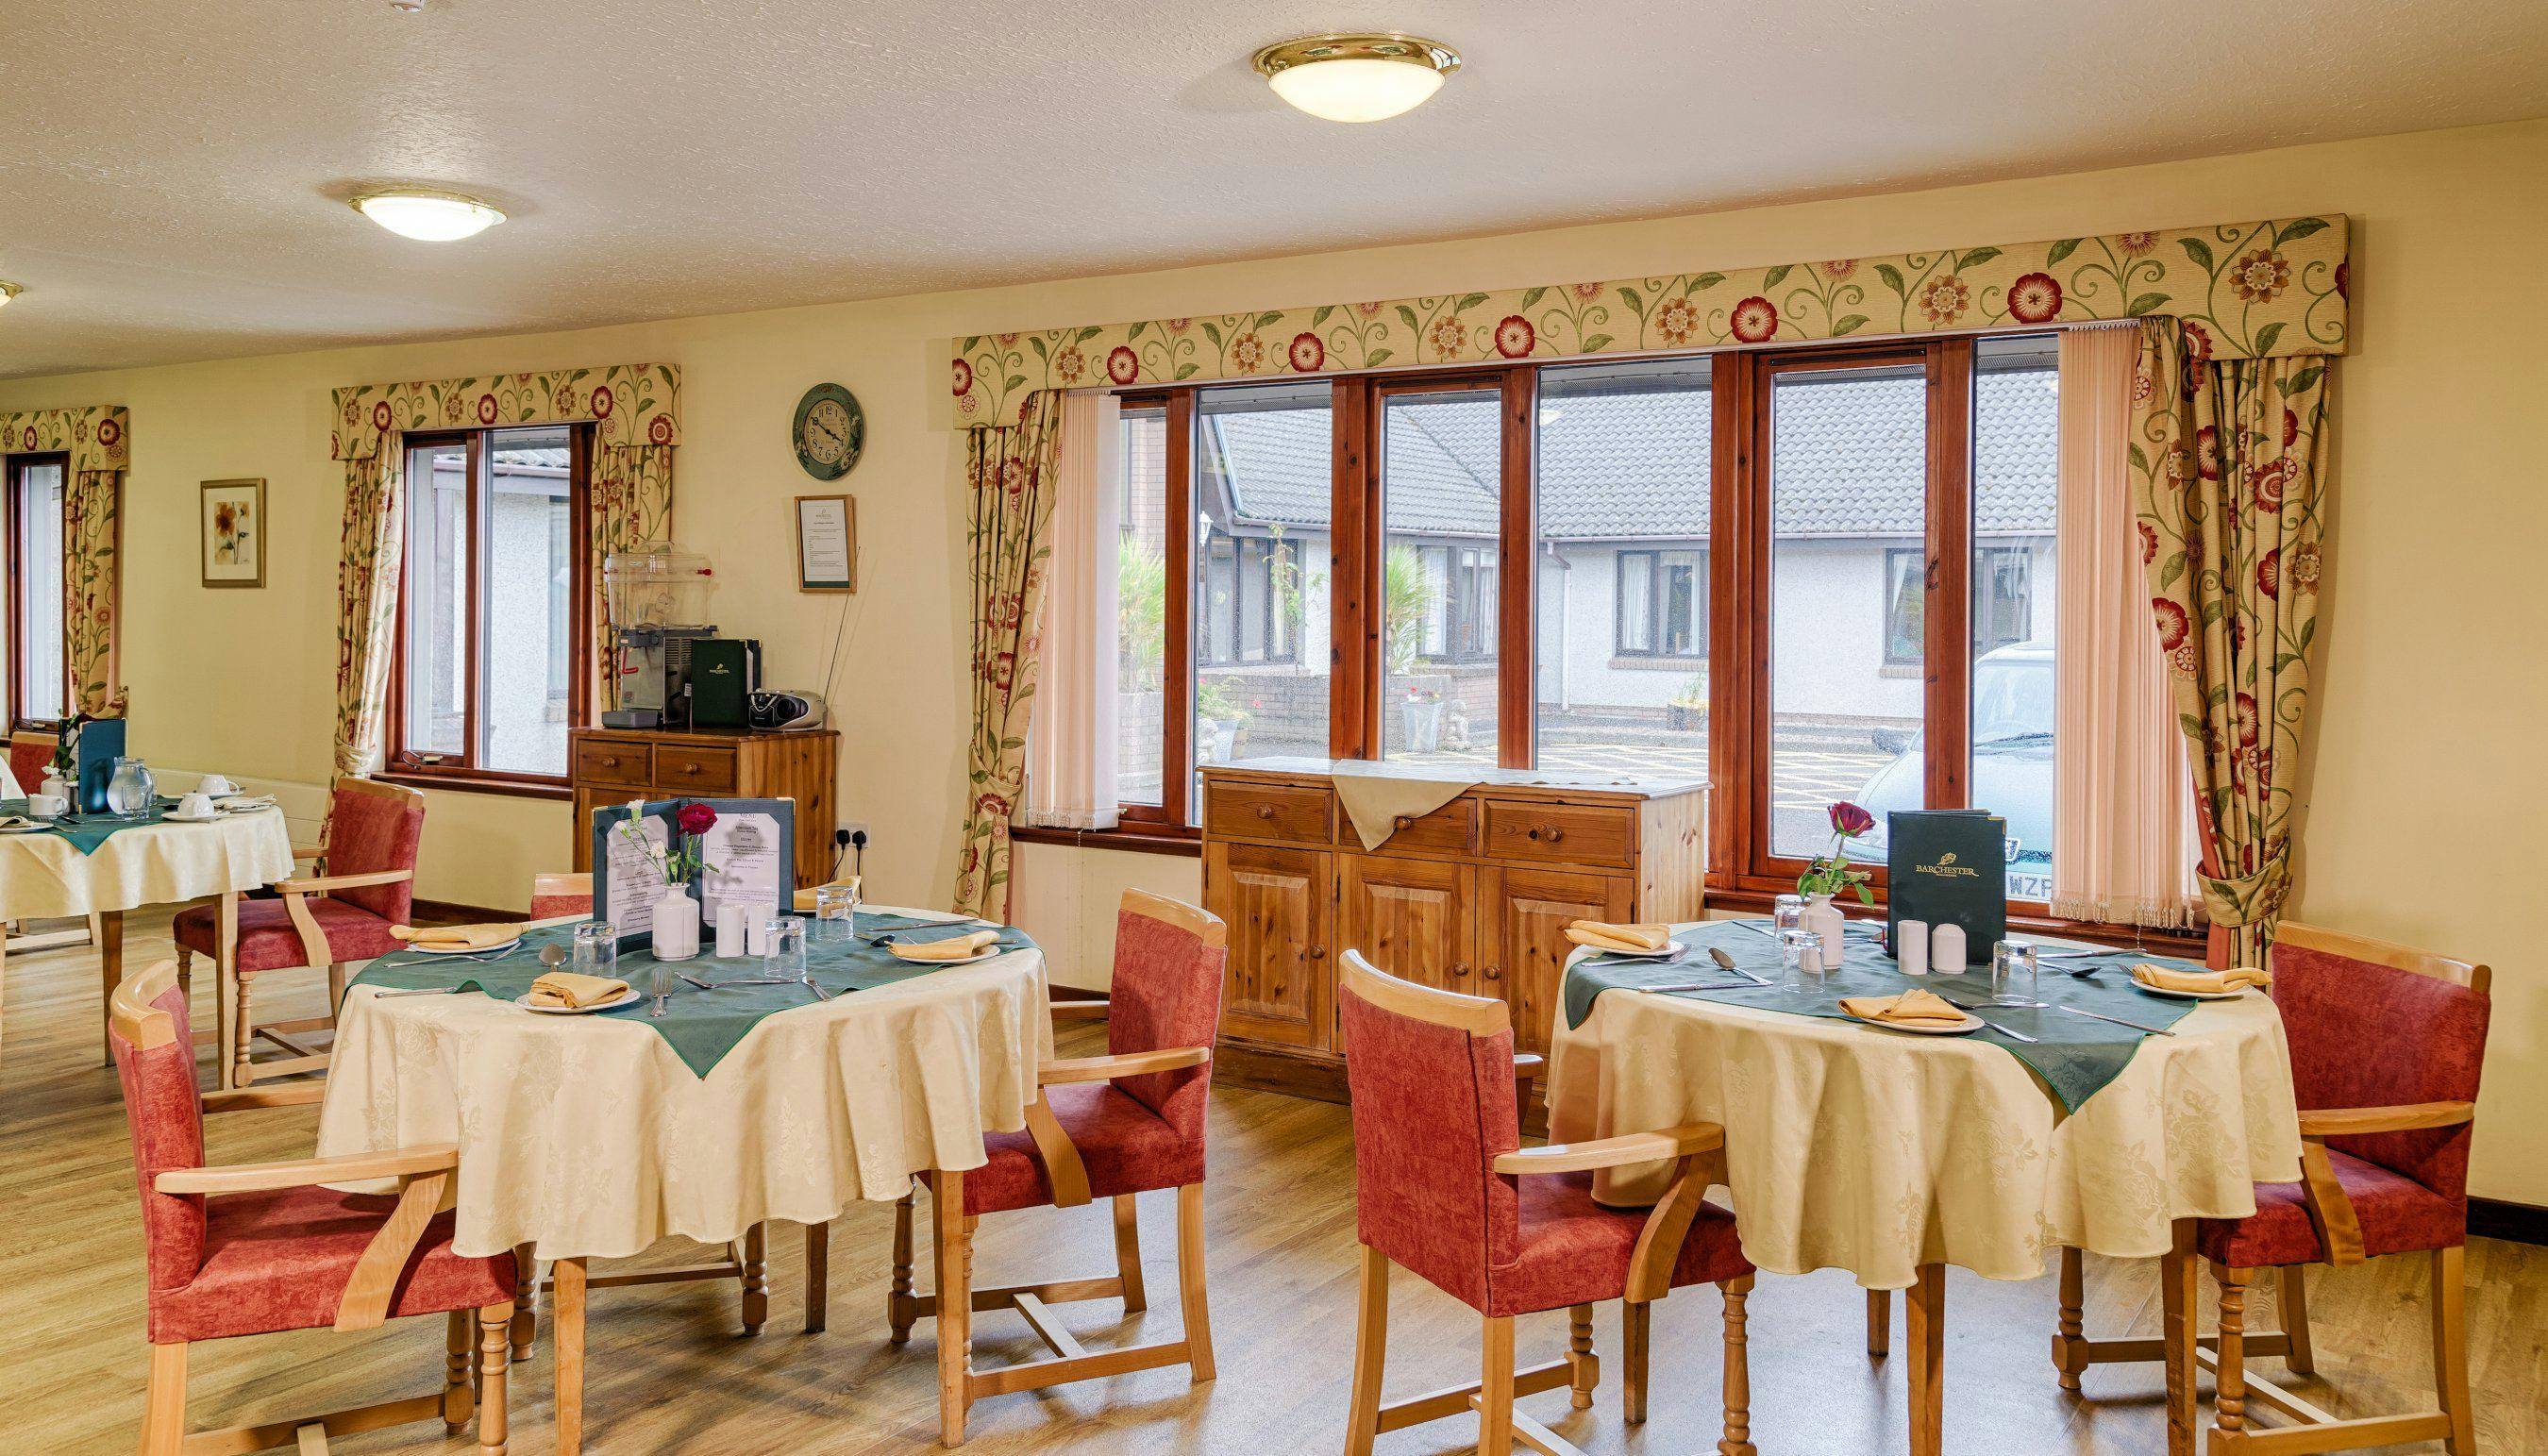 Dining Room at Pentland View Care Home in Thurso, Highland